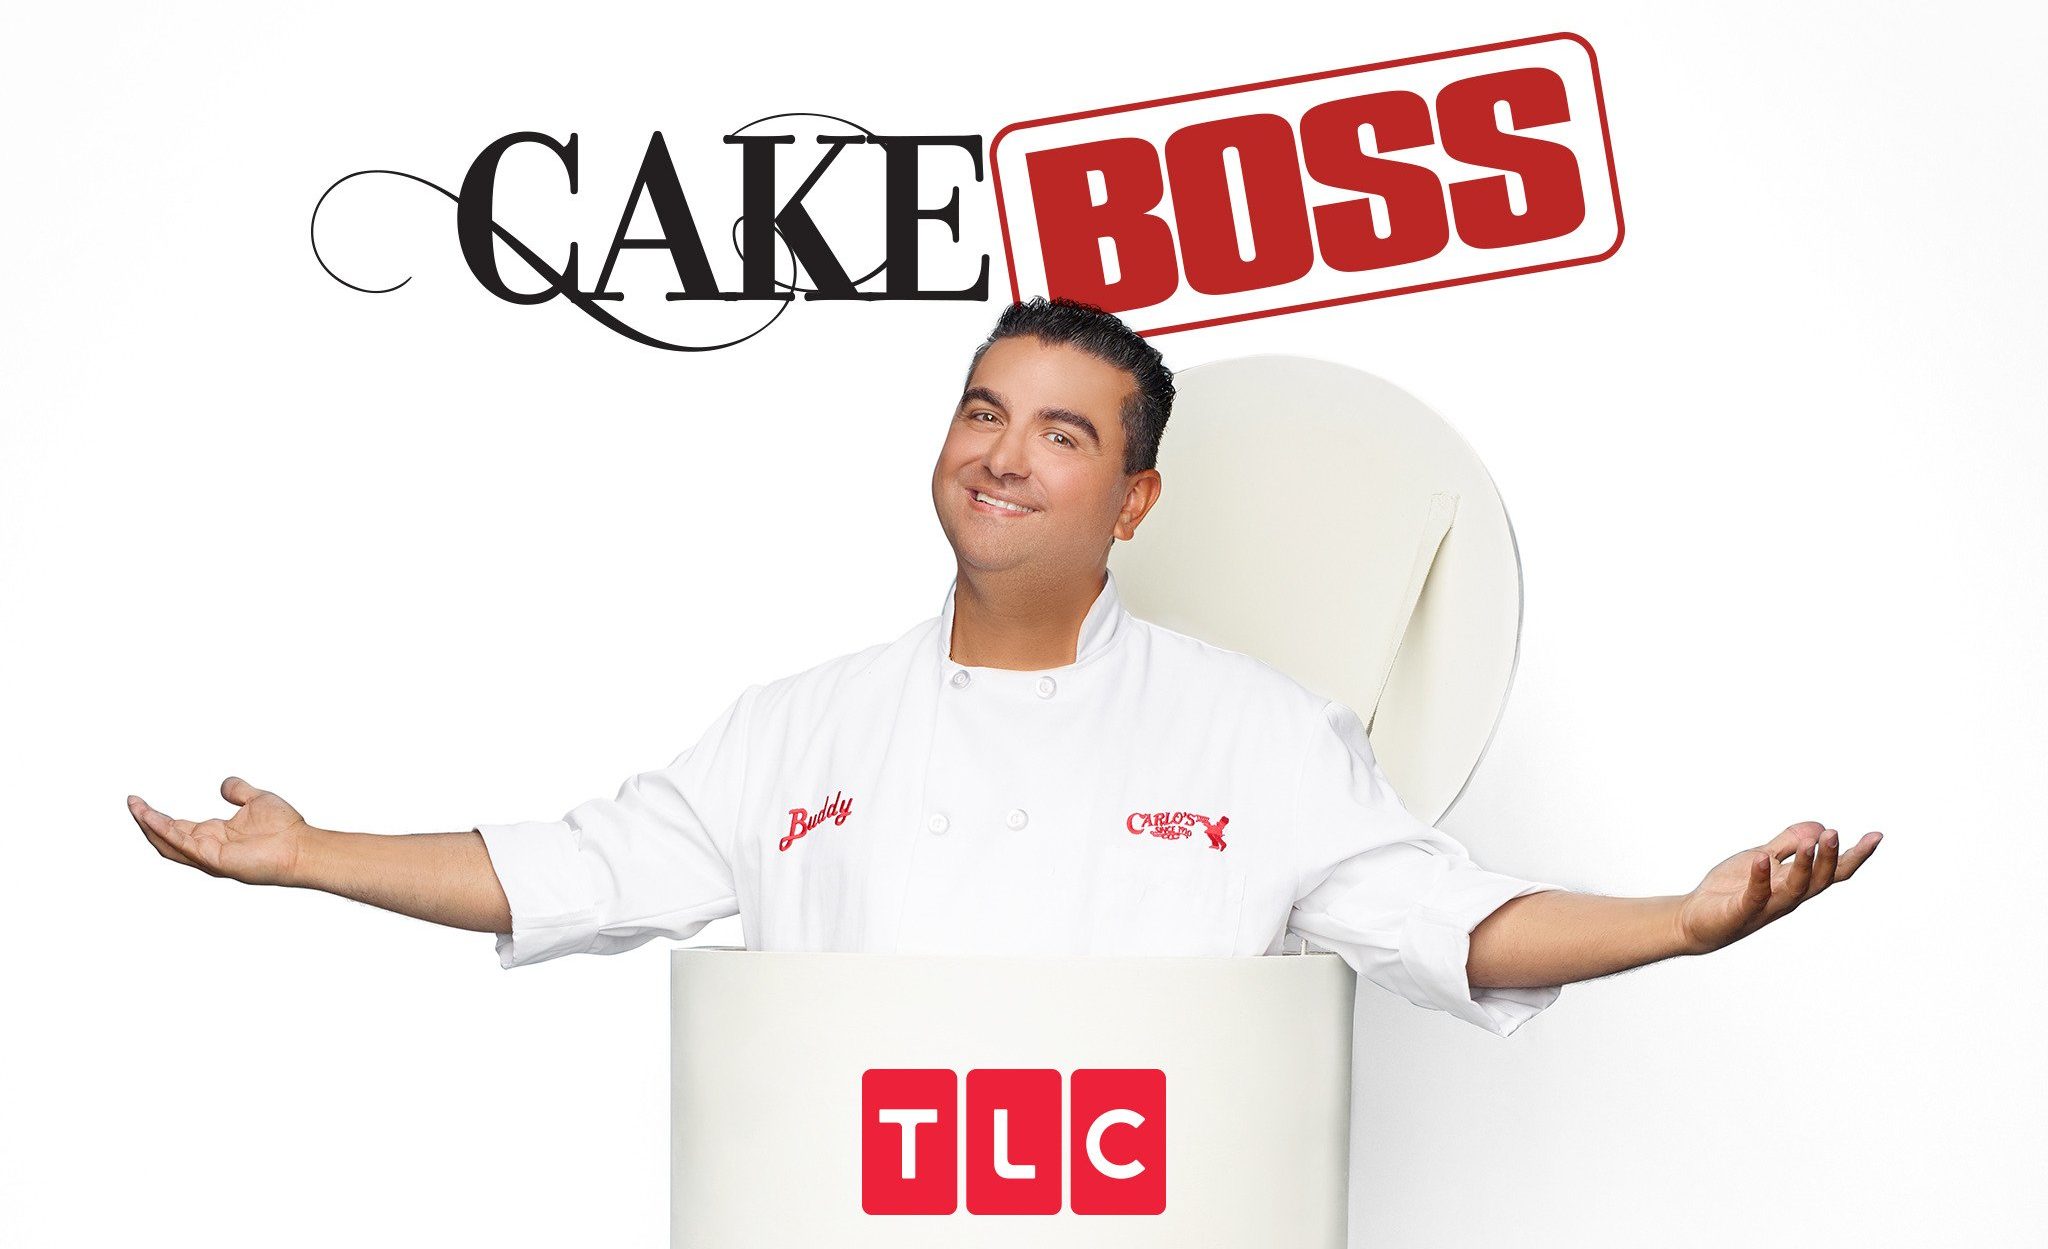 Pluto TV Adds a 24/7 Cake Boss Channel